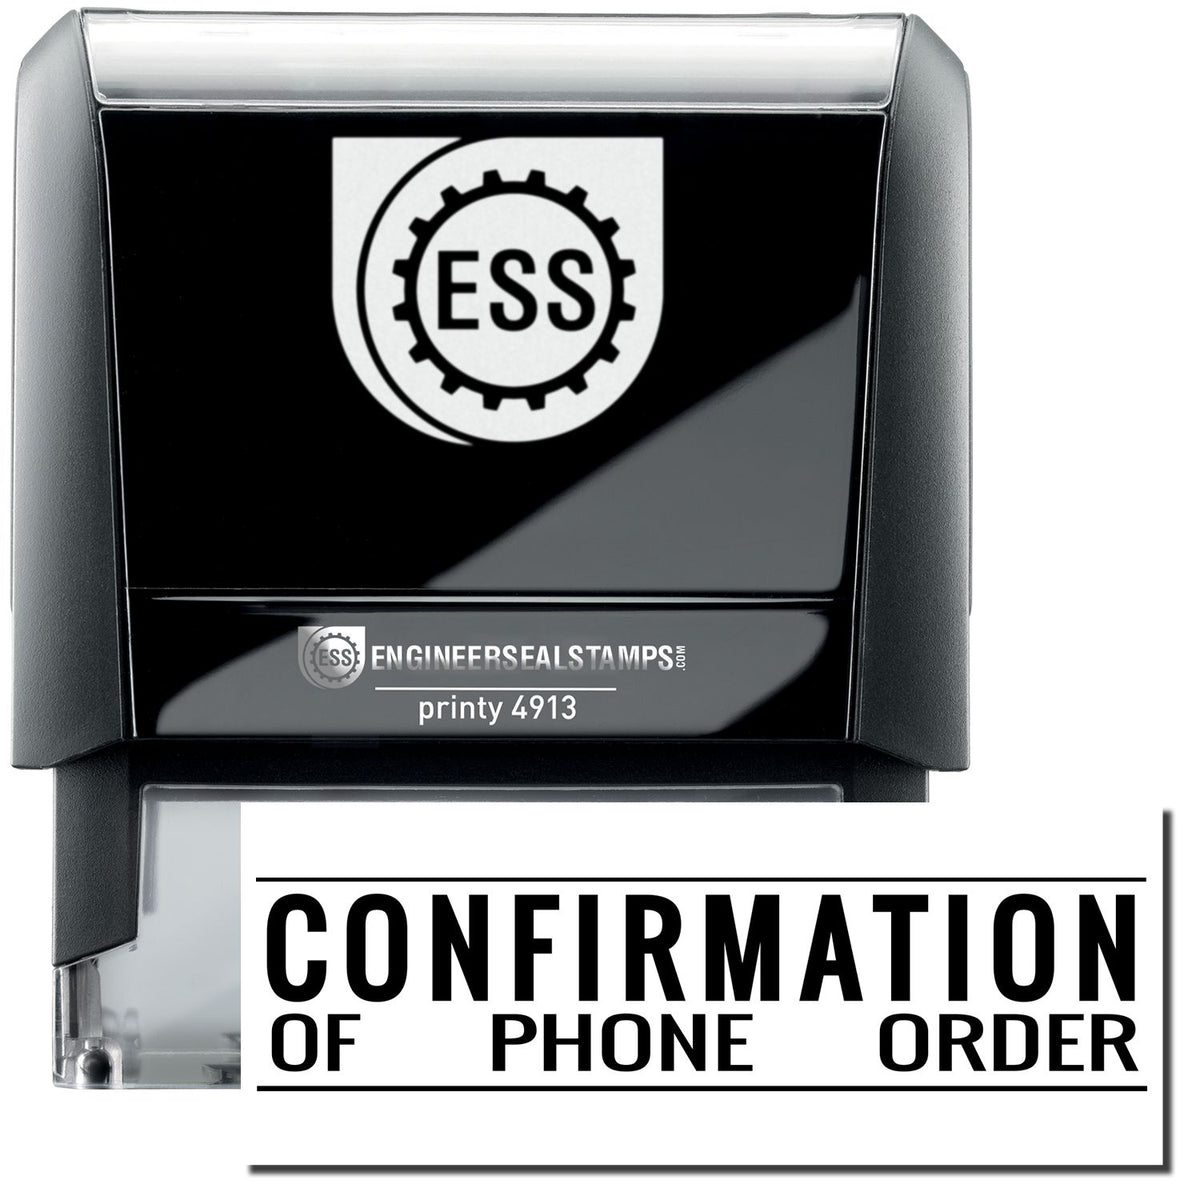 A self-inking stamp with a stamped image showing how the text &quot;CONFIRMATION OF PHONE ORDER&quot; in a large font with two horizontal lines above and under the text is displayed after stamping.